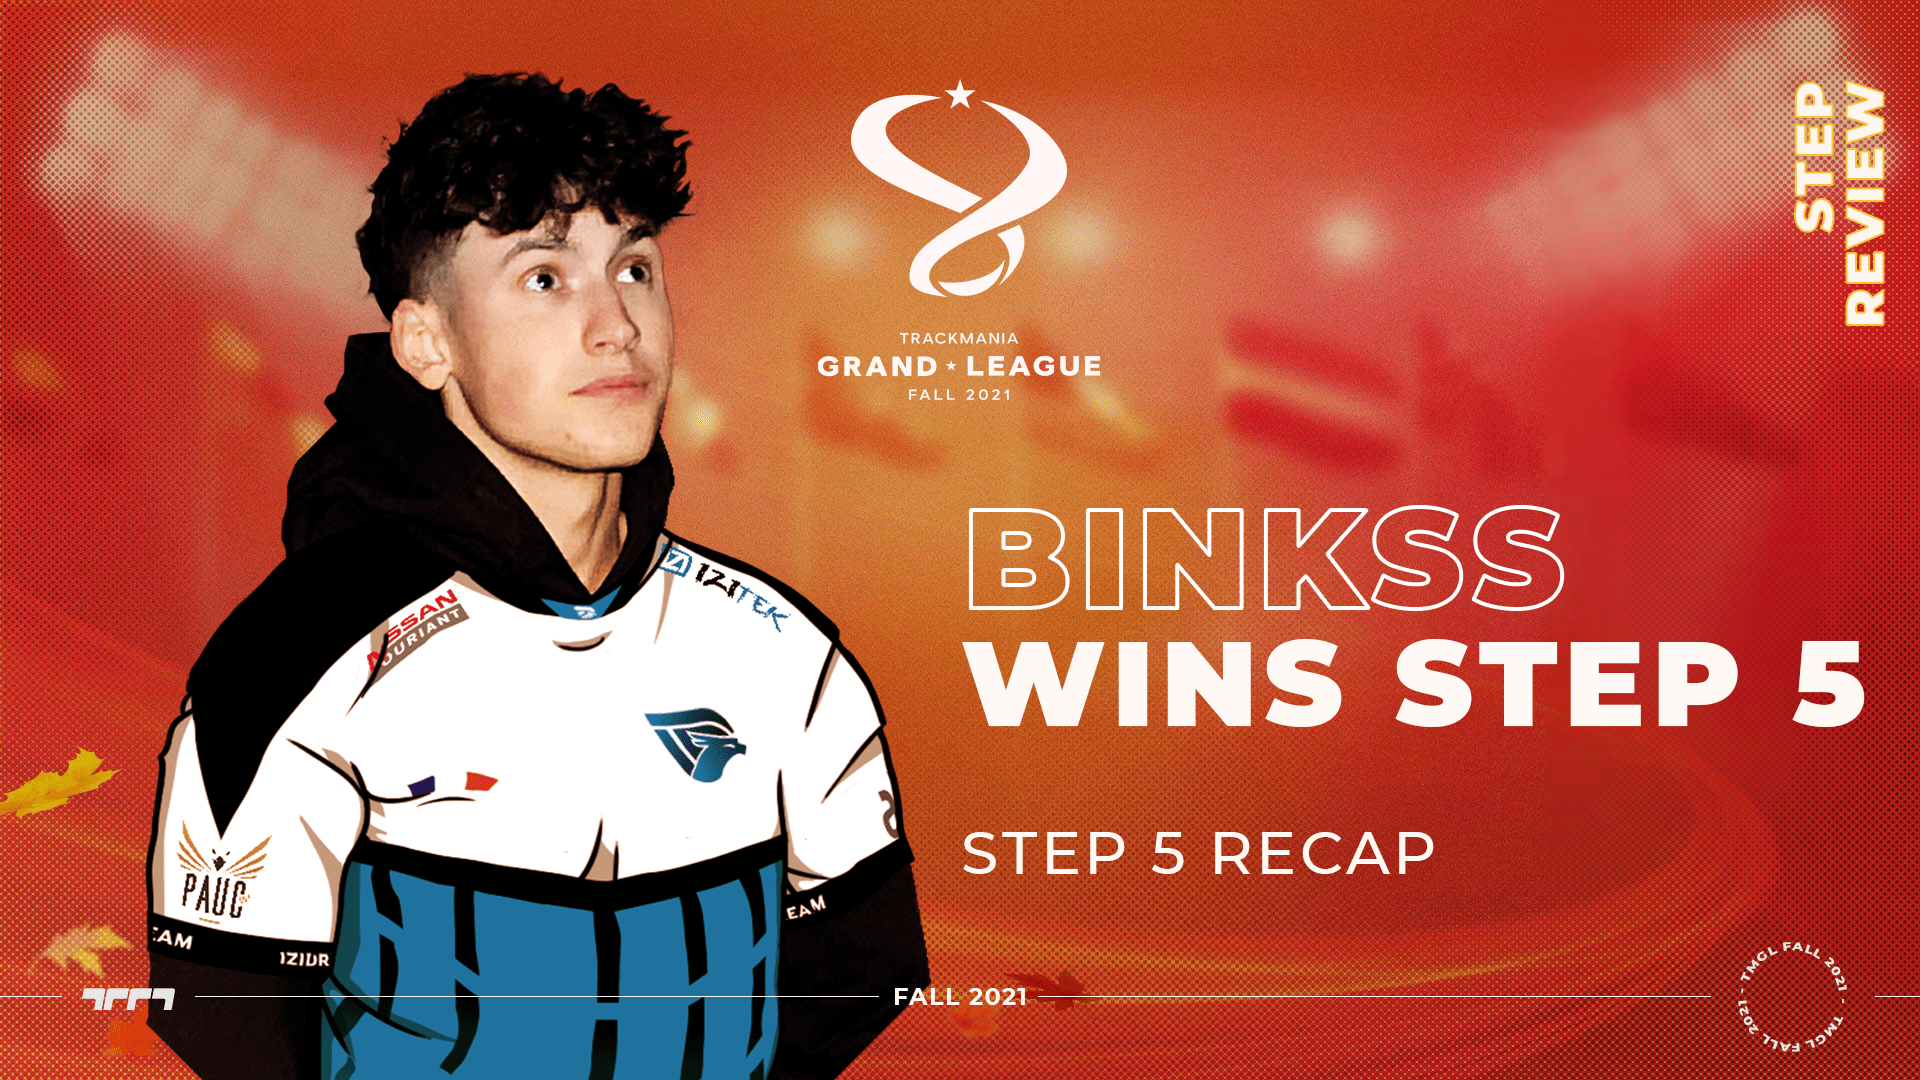 Binkss wins Step 5, GranaDy back at the top of the ranking